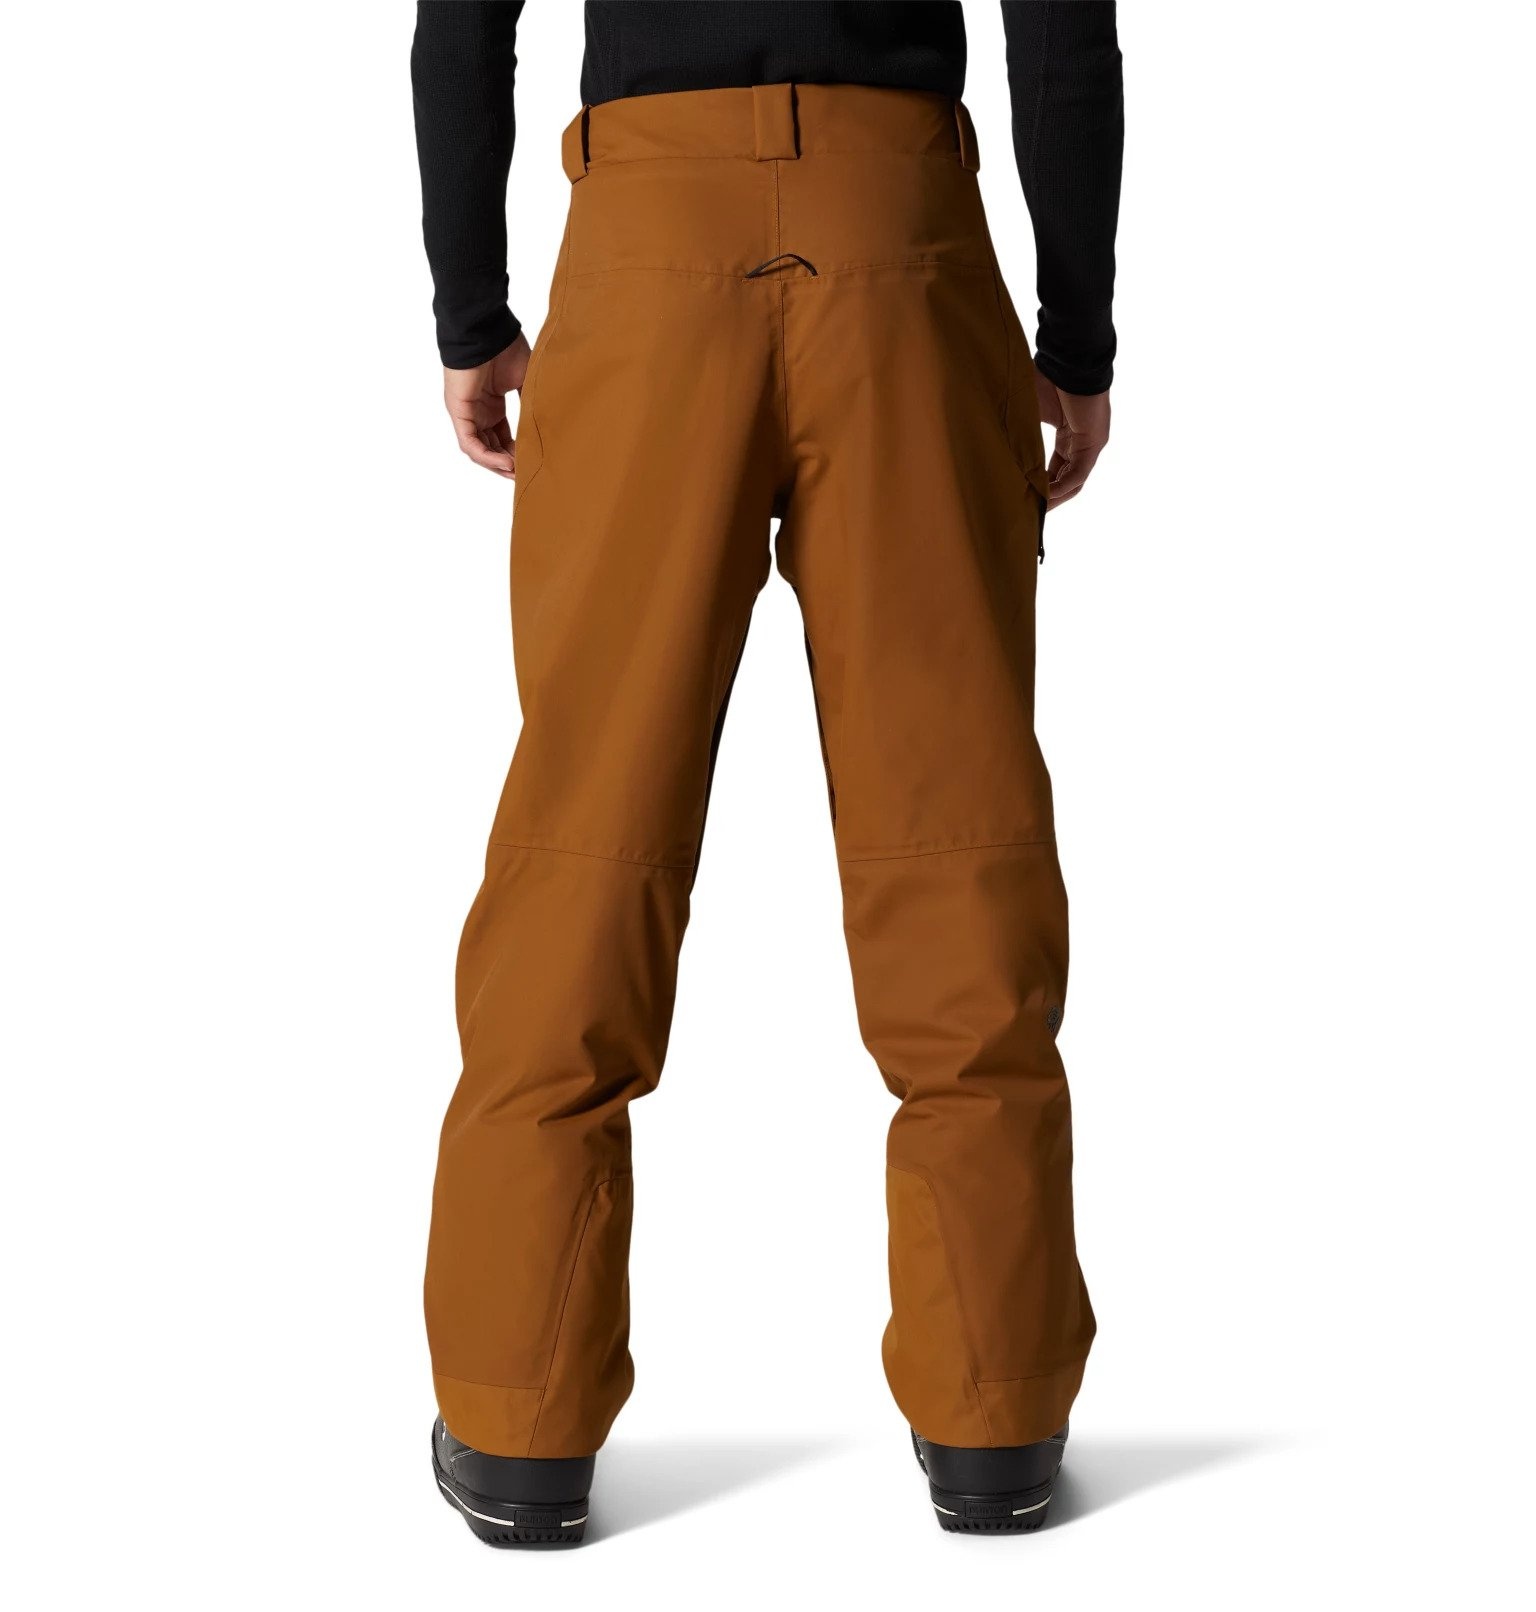 FireFall/2 Insulated Pant, Golden Brown